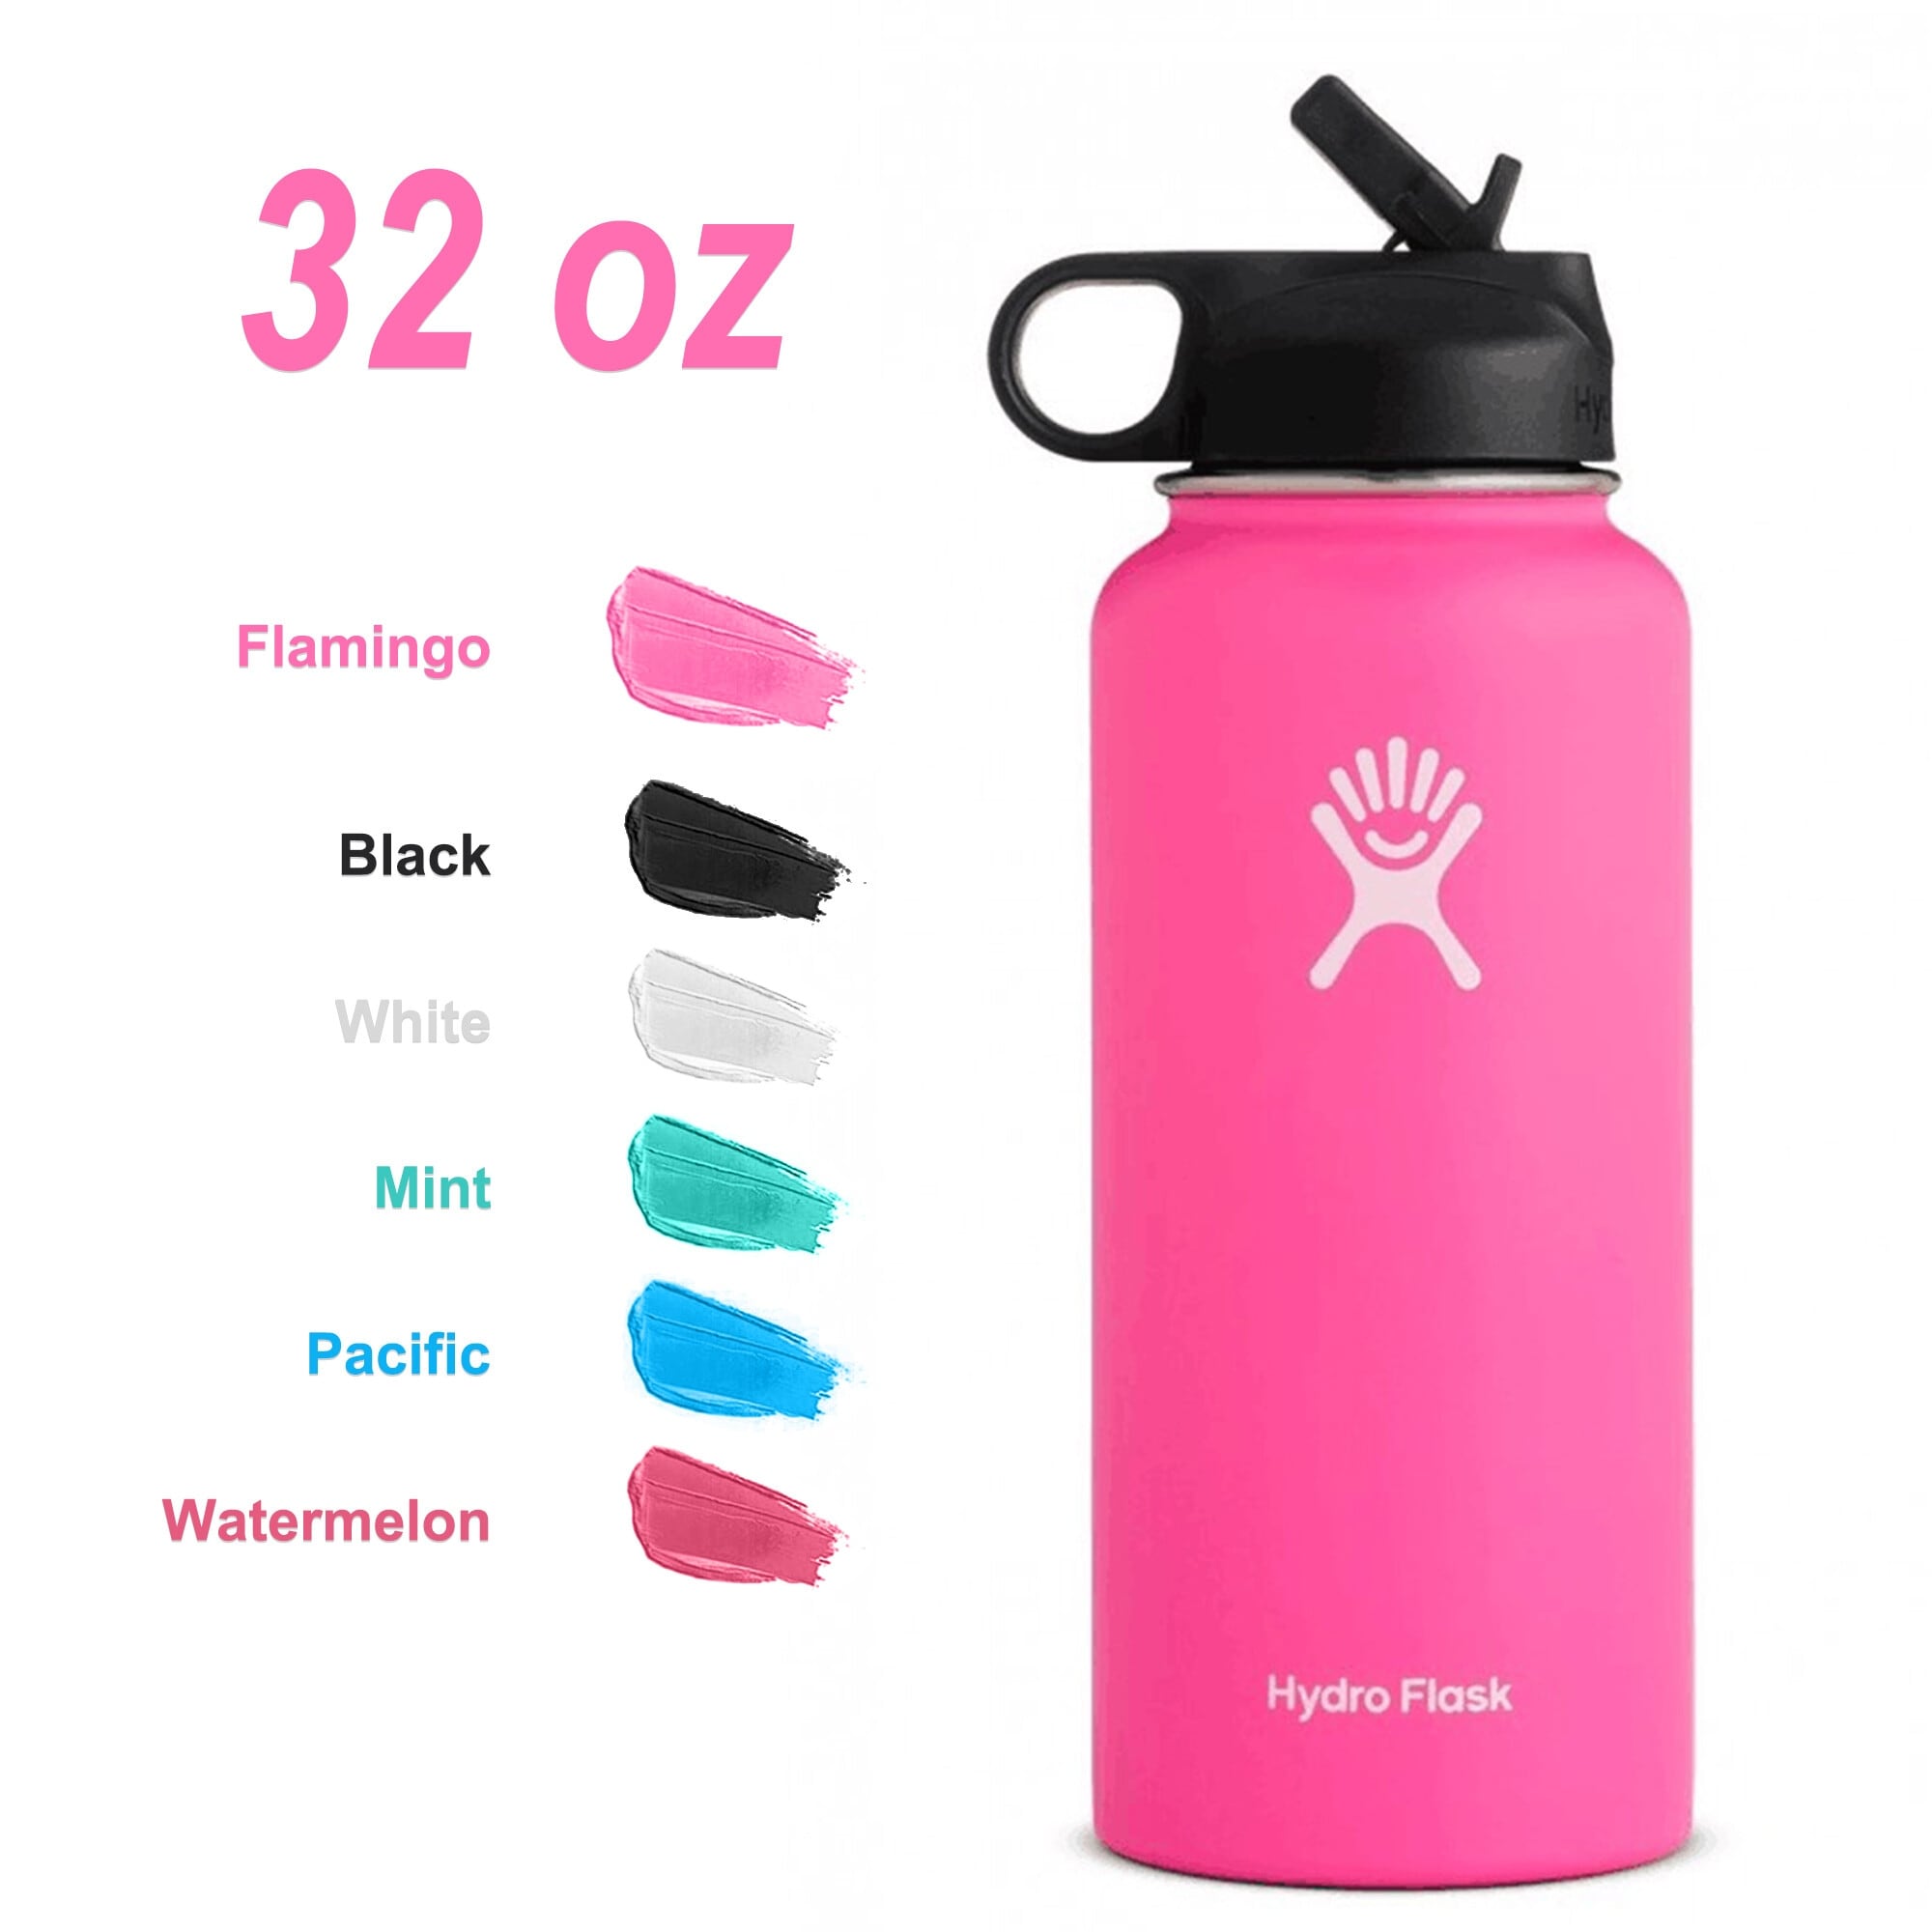 https://ak1.ostkcdn.com/images/products/is/images/direct/0fe4ff522df4b784a48a2183f0e9e03afbc4c90f/Hydro-Flask-32oz-Vacuum-Insulated-Stainless-Steel-Water-Bottle-Wide-Mouth-with-Straw-Lid.jpg